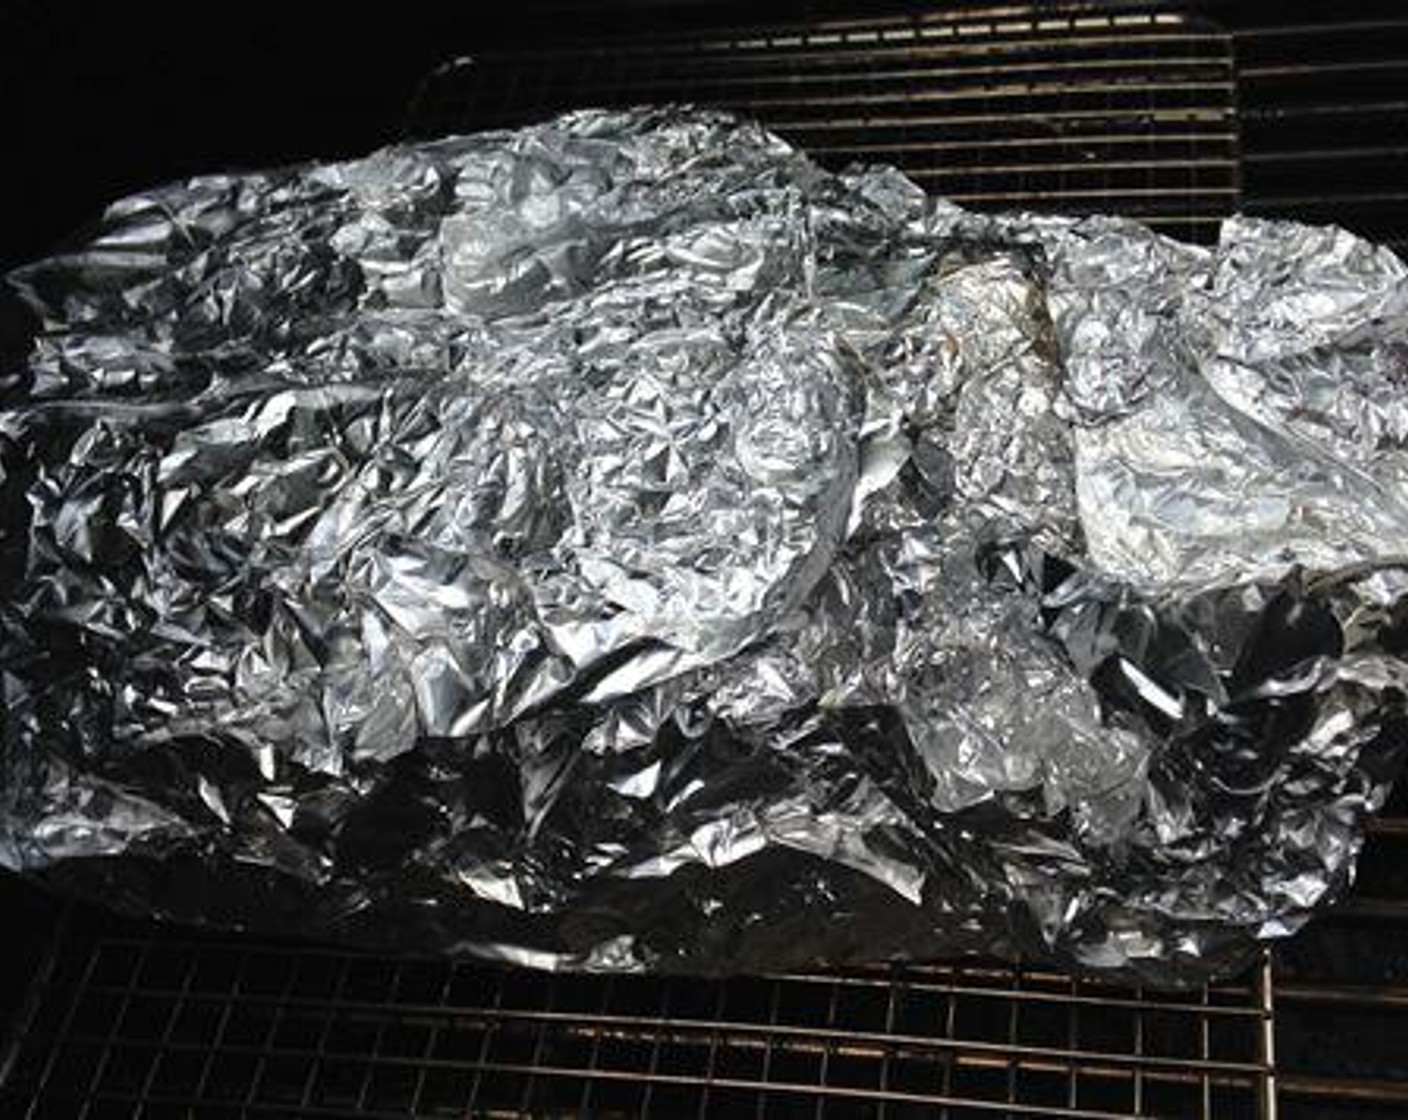 step 4 Once the pork butt hits 160 degrees F (71 degrees C) internal, usually around 5 - 6 hours of smoke, it's time to wrap. Place the aluminum ​foil on the work surface and sit​ the meat on it. Wrap the pork up tight in the aluminum ​foil and place it back on the smoker.